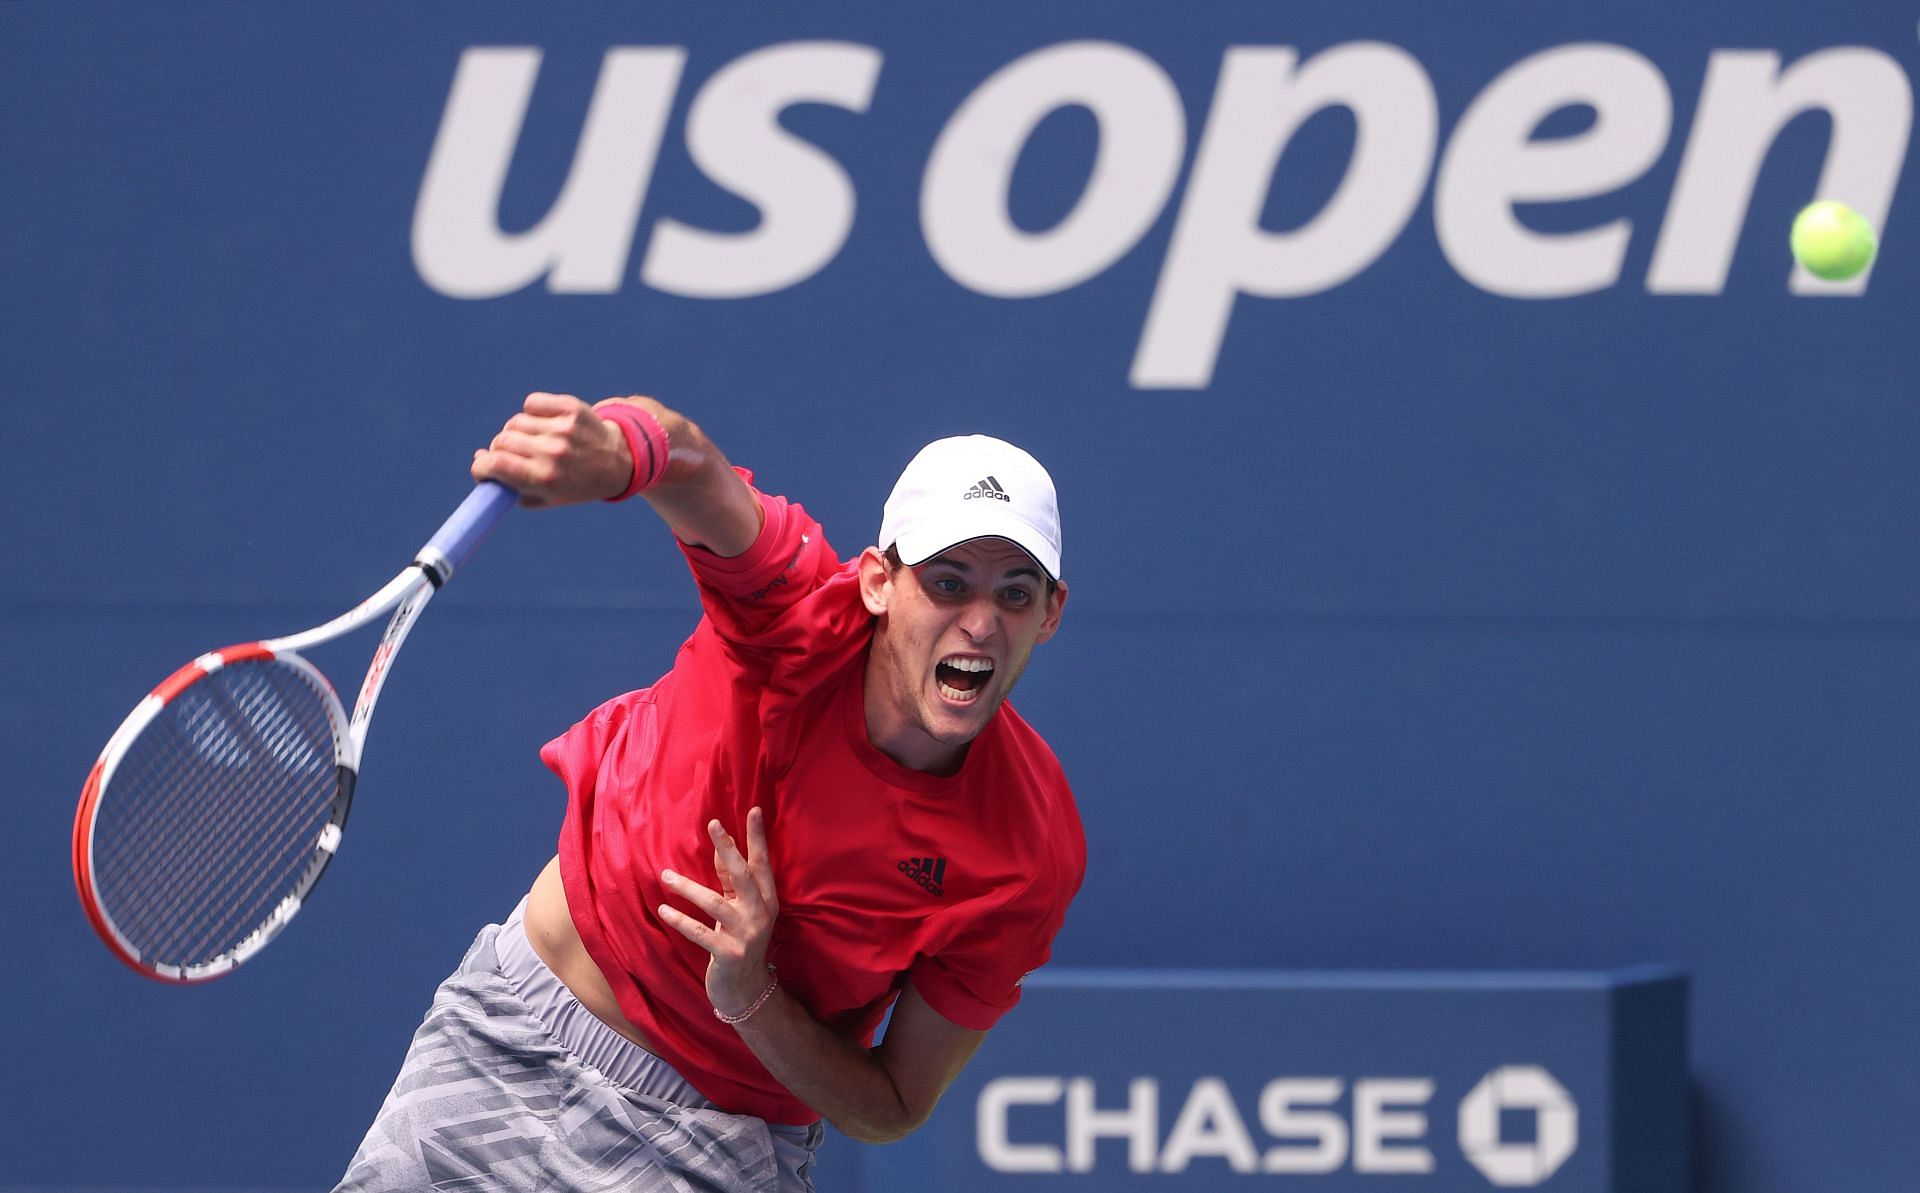 Sumit Nagal faced Dominic Thiem in the second round of the 2020 US Open.